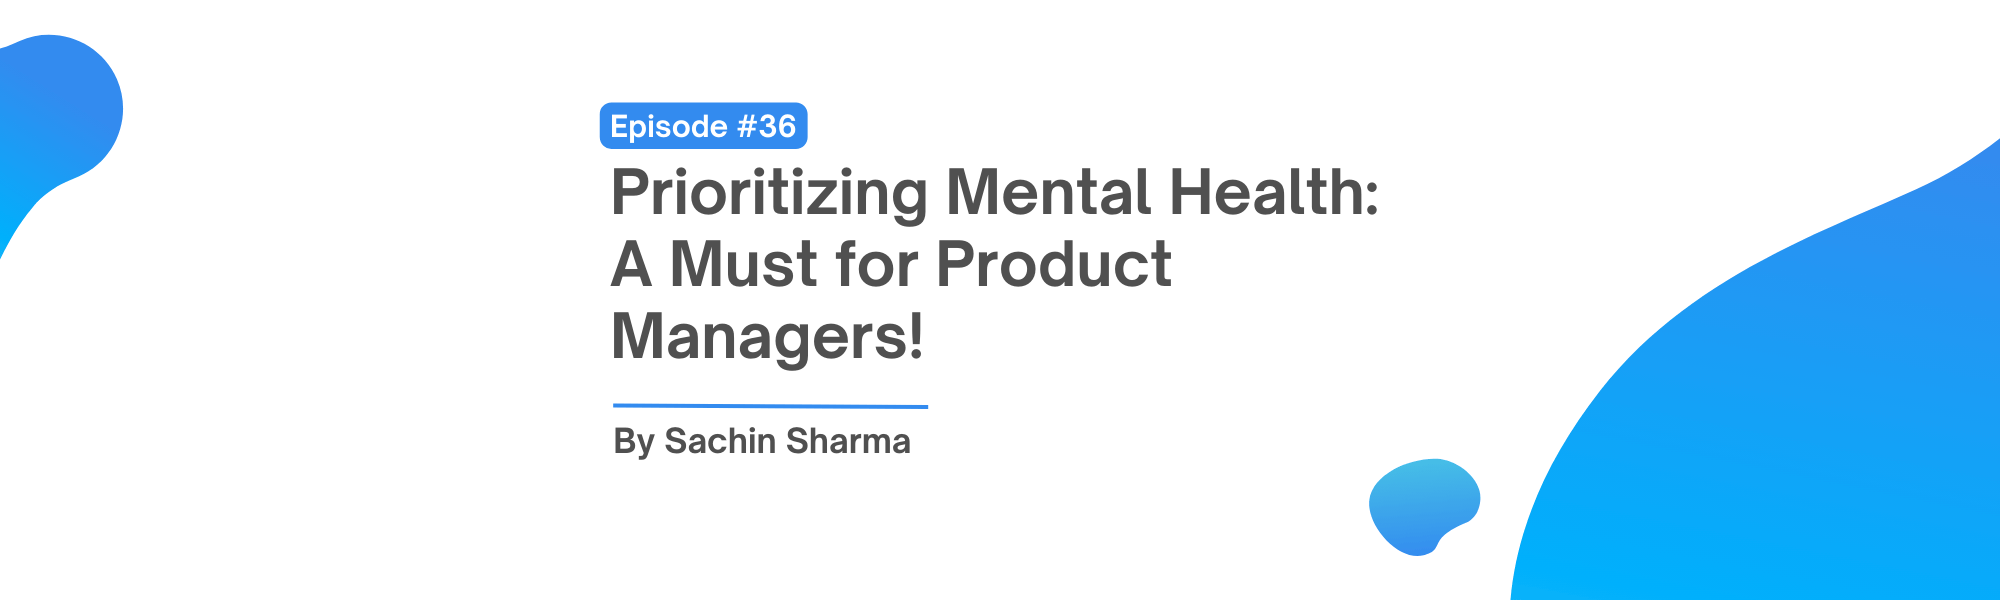 Prioritizing Mental Health: A Must for Product Managers!